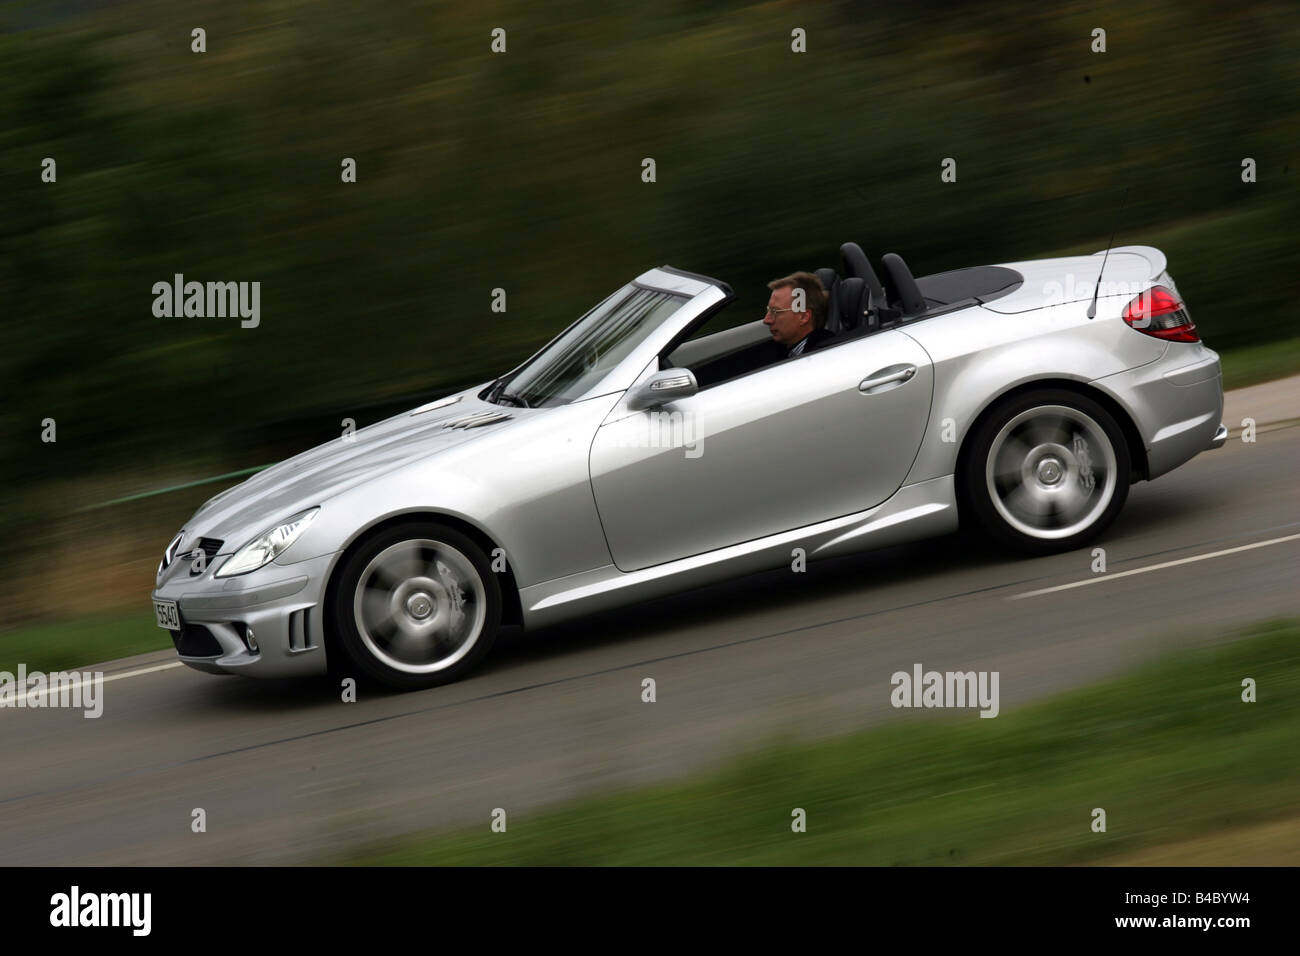 Car, Mercedes SLK 55 AMG, Convertible, model year 2004-, silver, open top, driving, side view, country road, photographer: Uli J Stock Photo